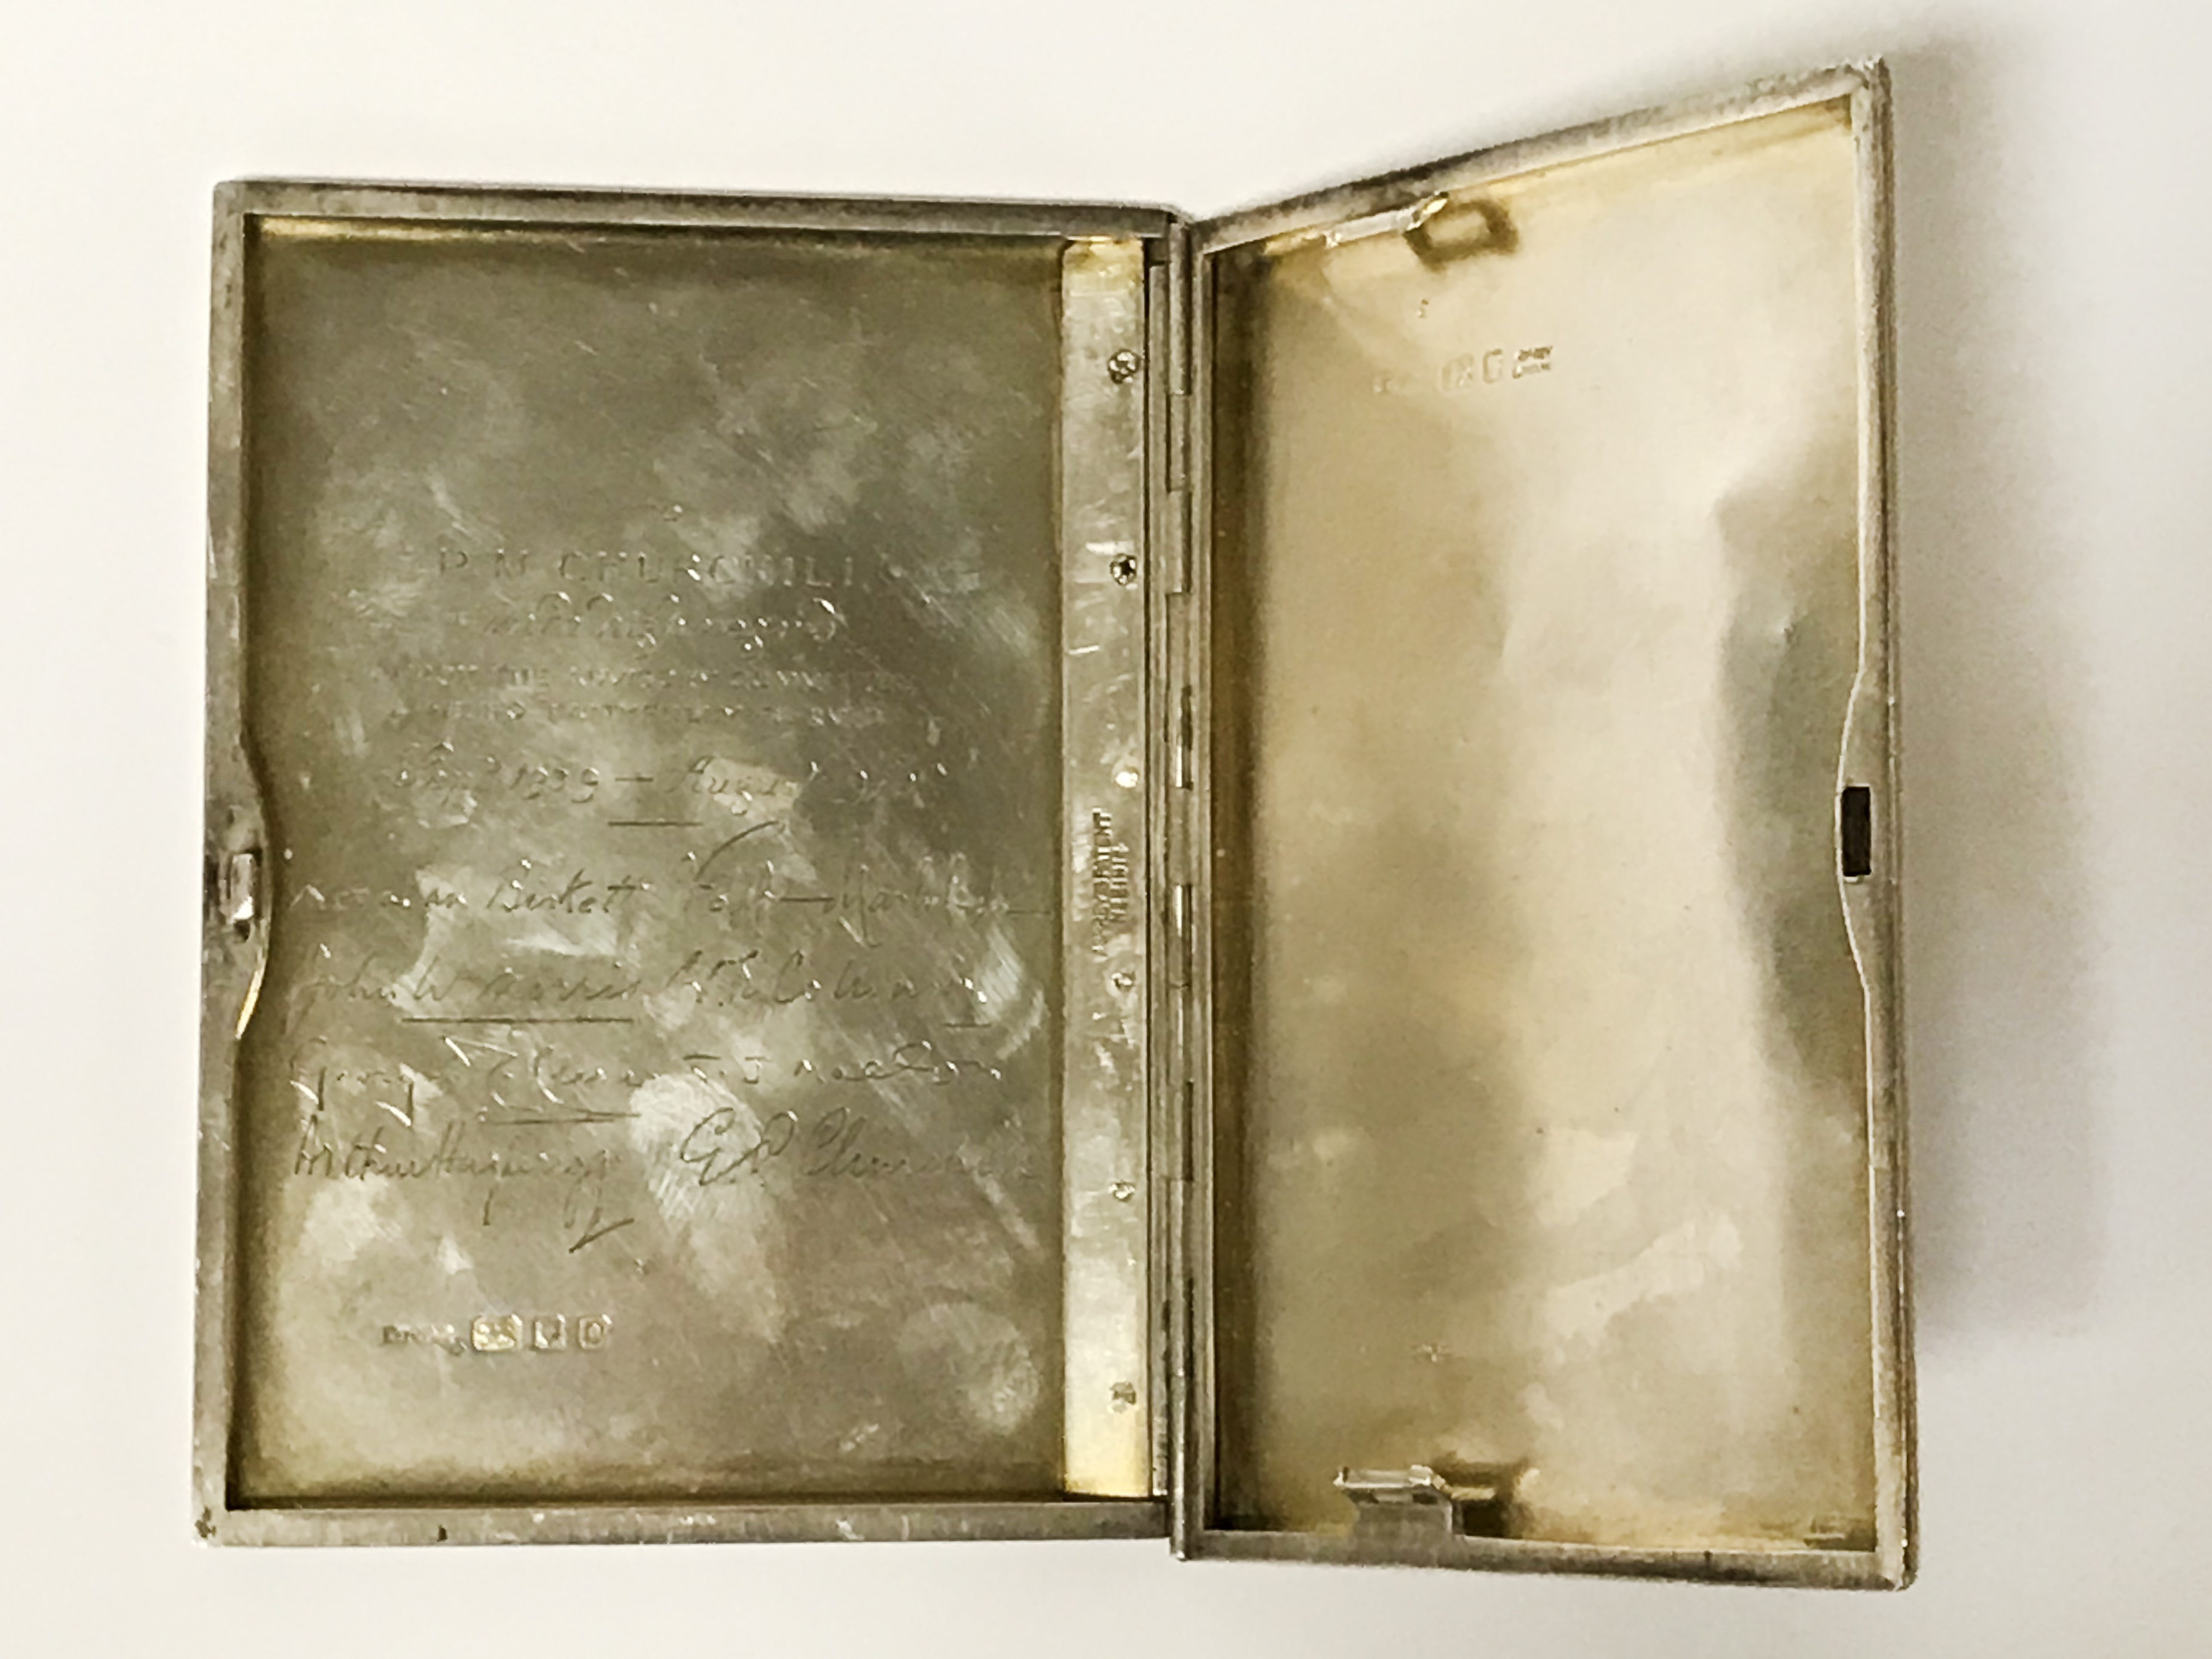 HALLMARKED SILVER ASPREY CIGARETTE CASE PRESENTED TO PETER MORLAND CHURCHILL DATED 1940 - Image 4 of 6